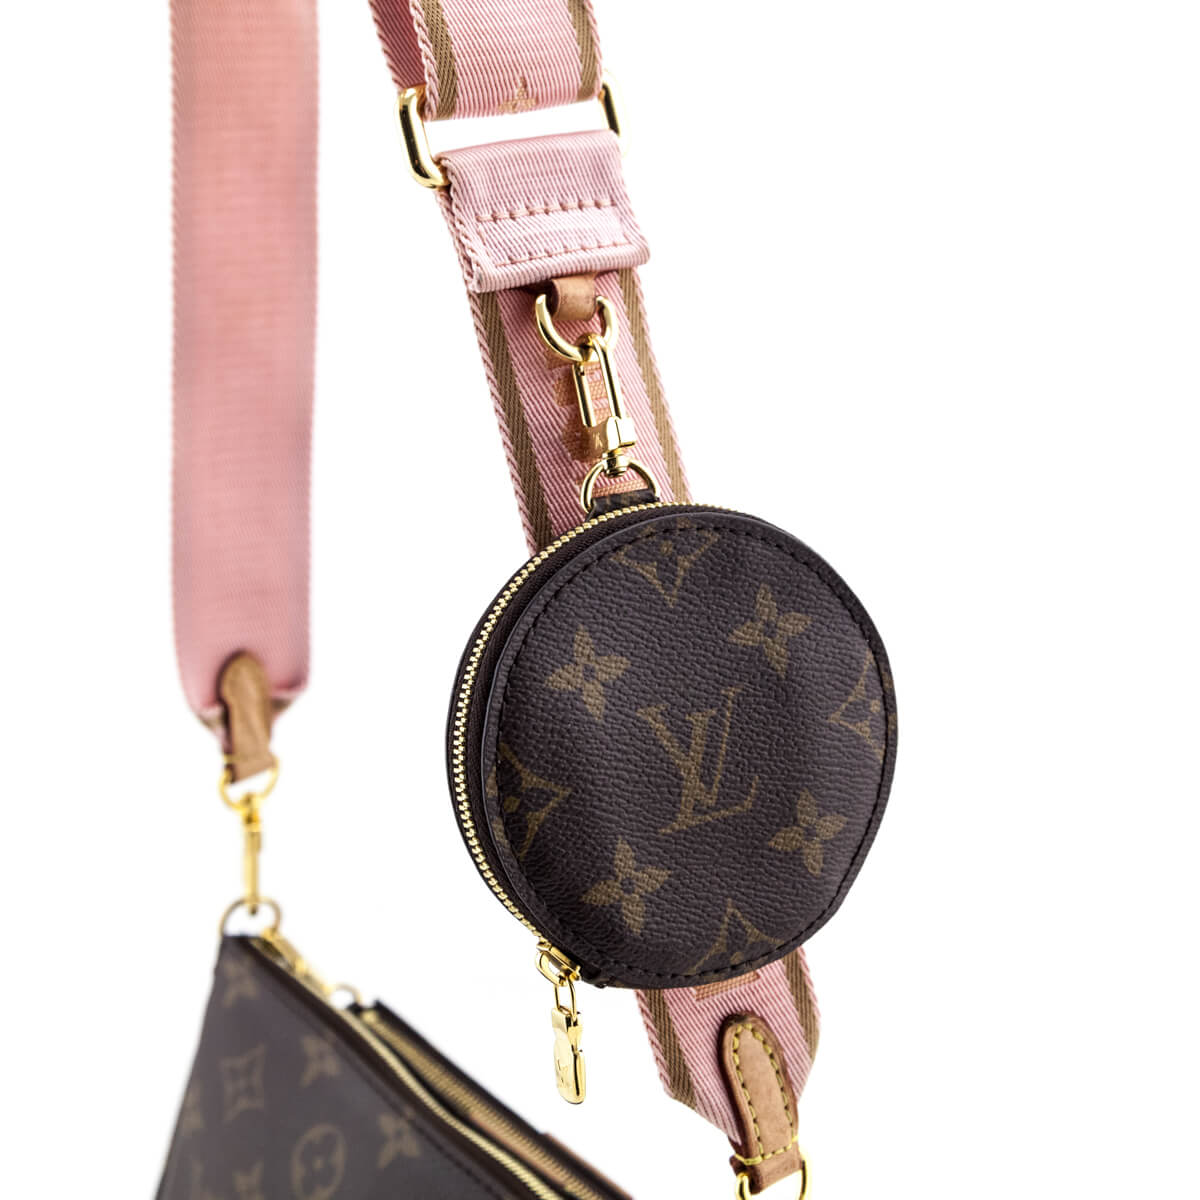 lv bag with pink strap